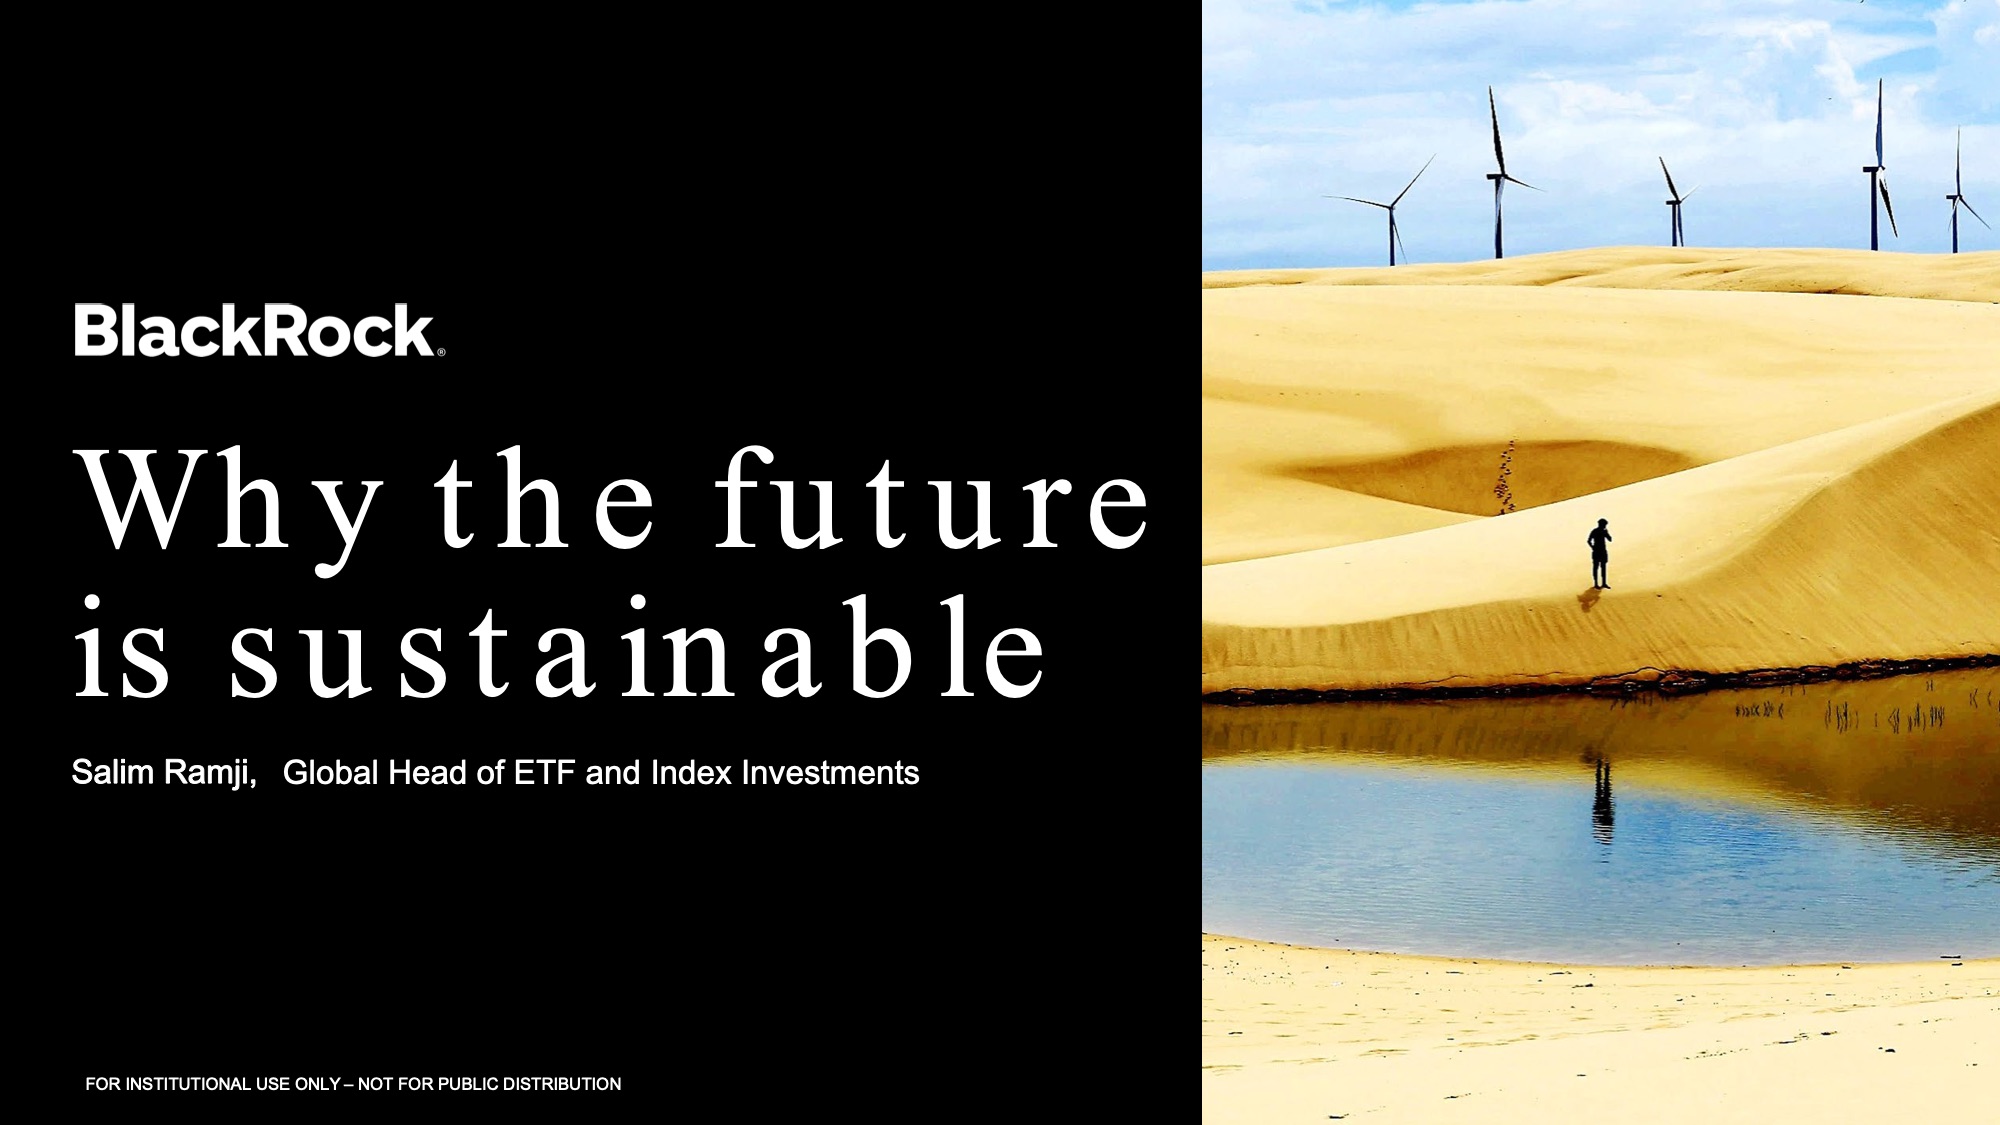 「Why the future is sustainable?」（社会的インパクト投資フォーラム プレゼンテーション資料）